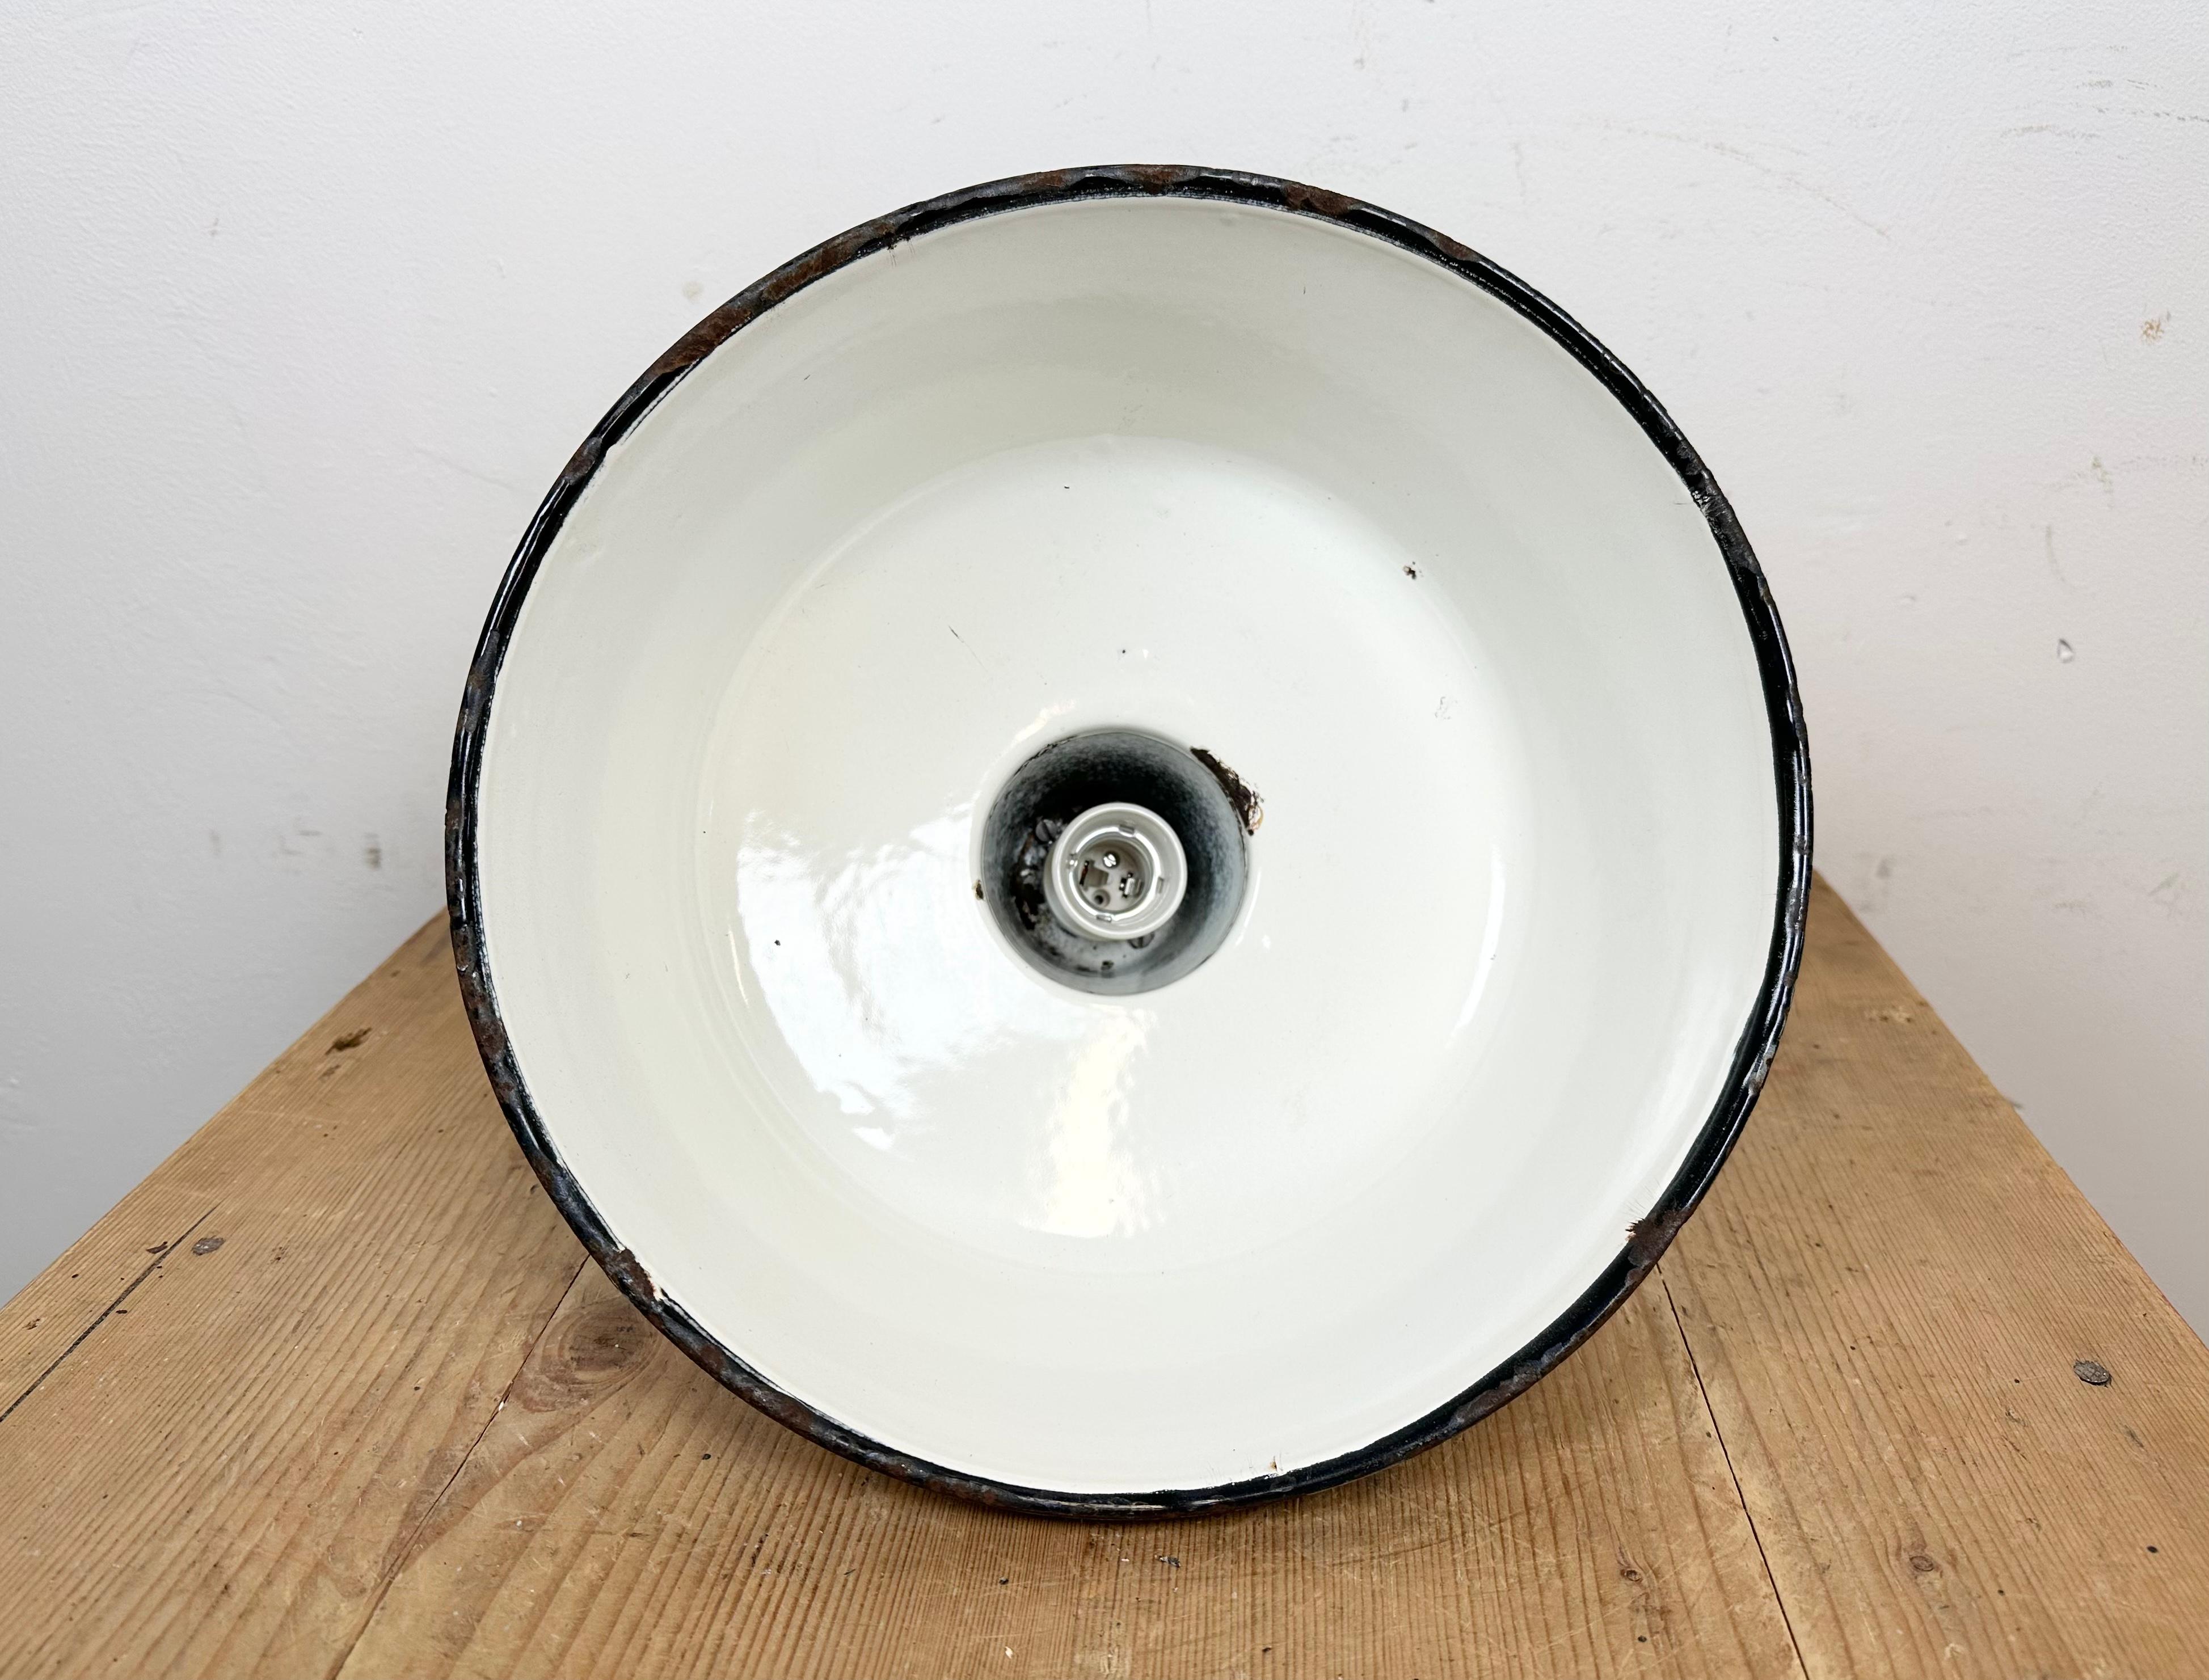 Industrial Grey Enamel Factory Lamp with Cast Iron Top, 1960s For Sale 9